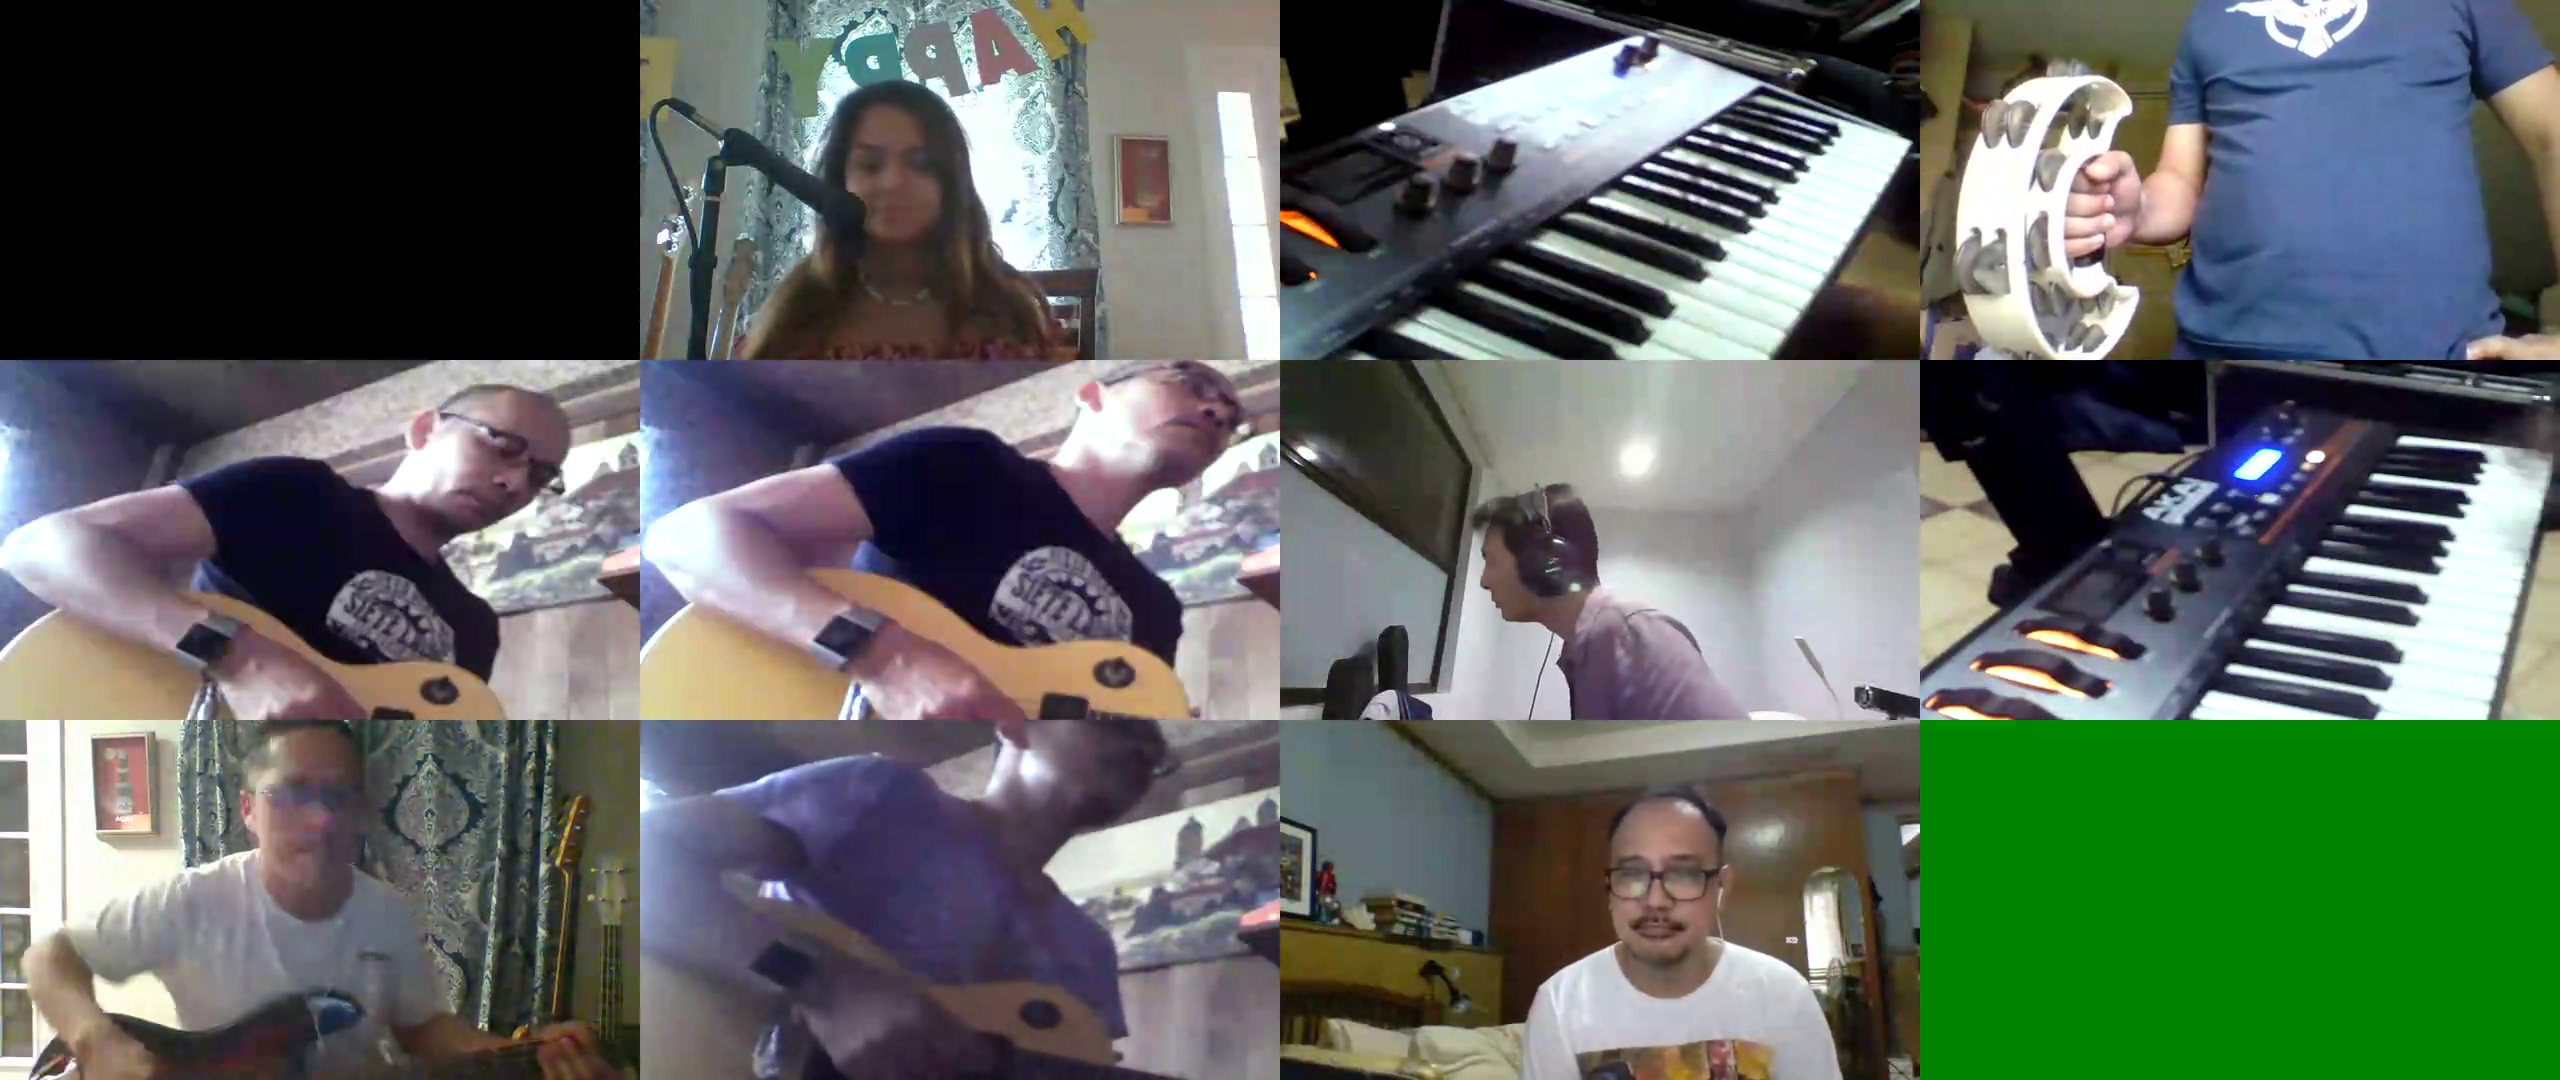 ADORE YOU cover by Call of Nature Band from the Philippines